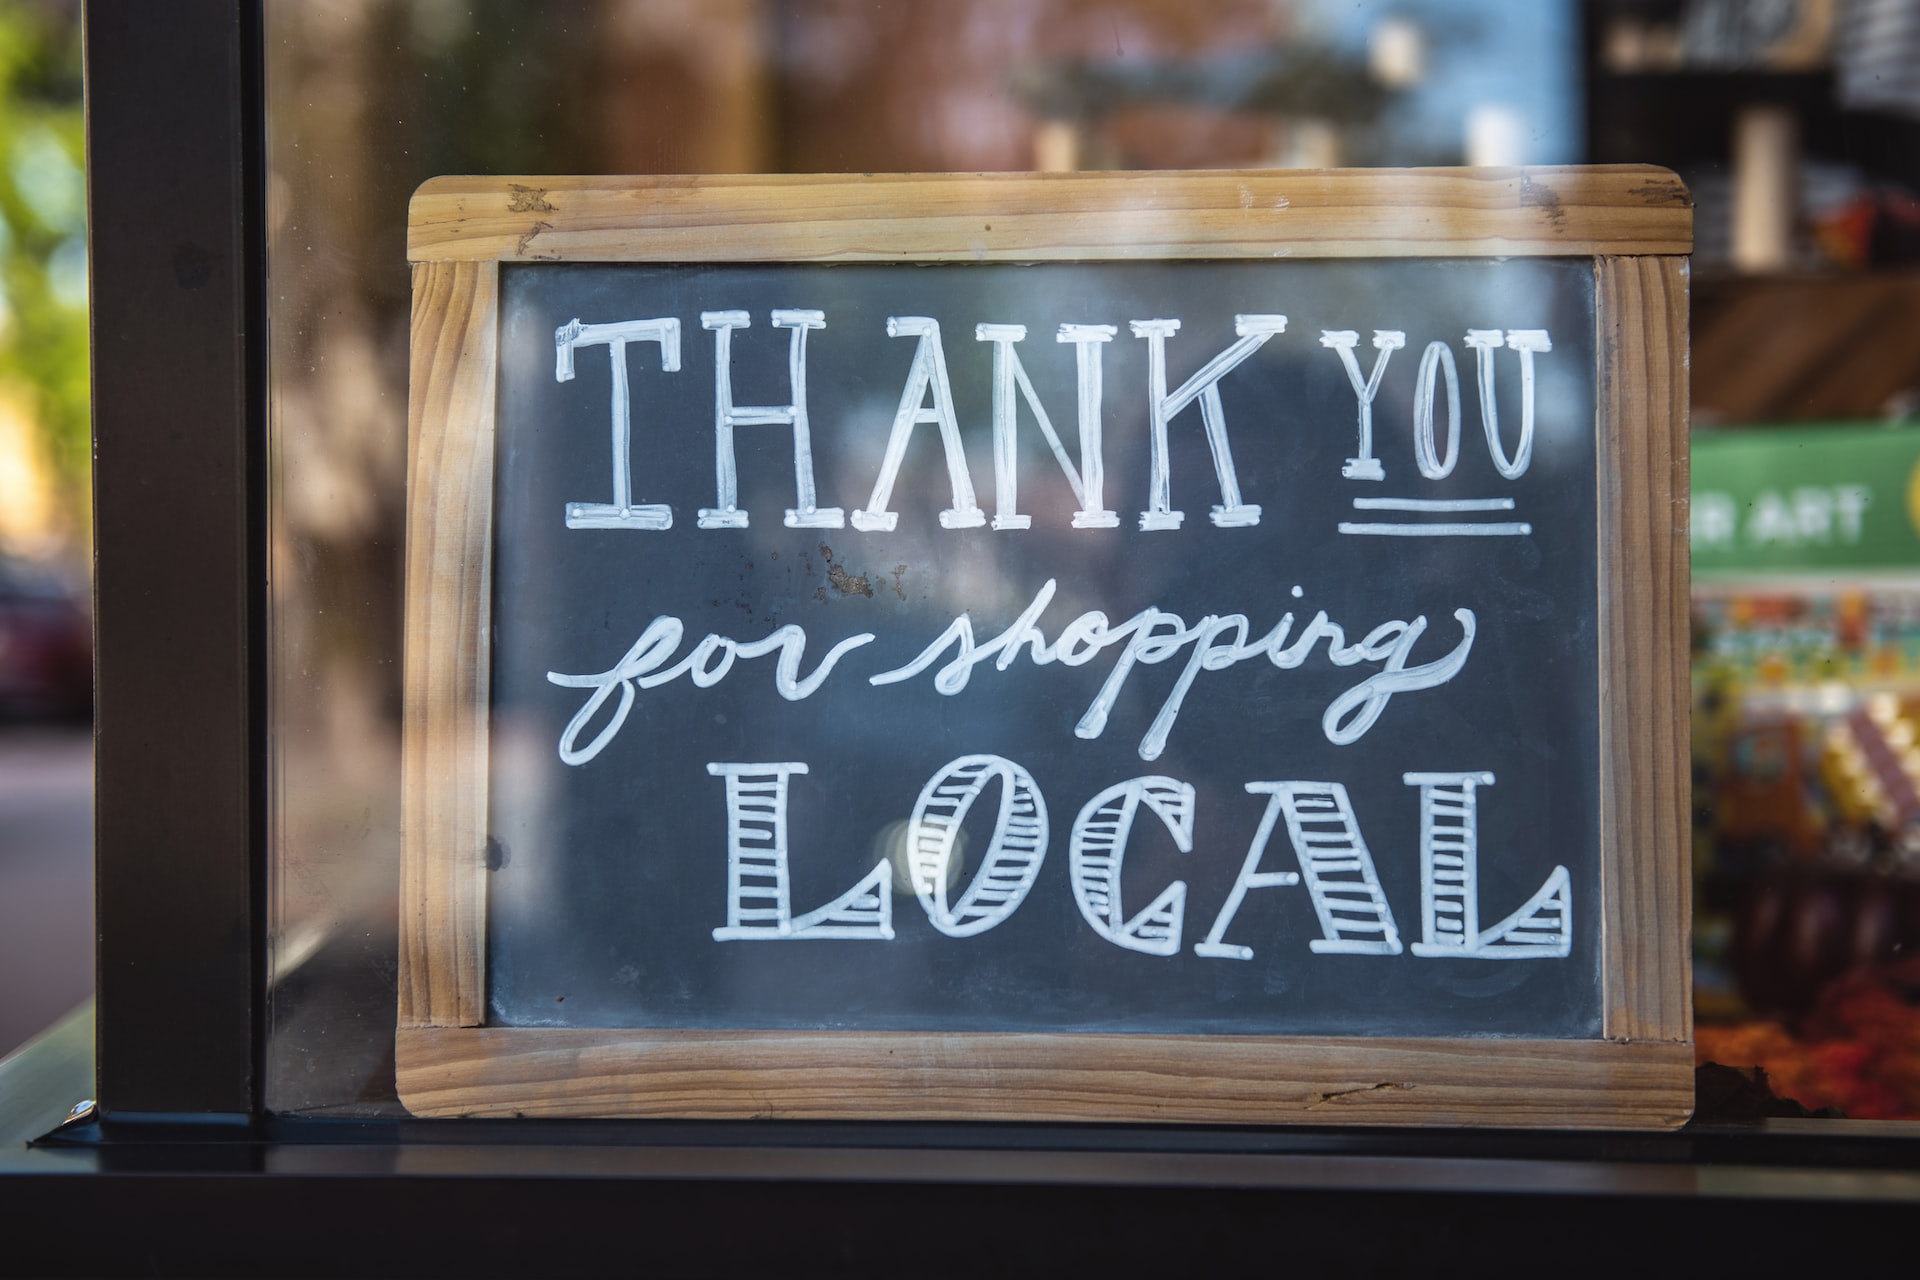 A sign thanks customers for shopping local.